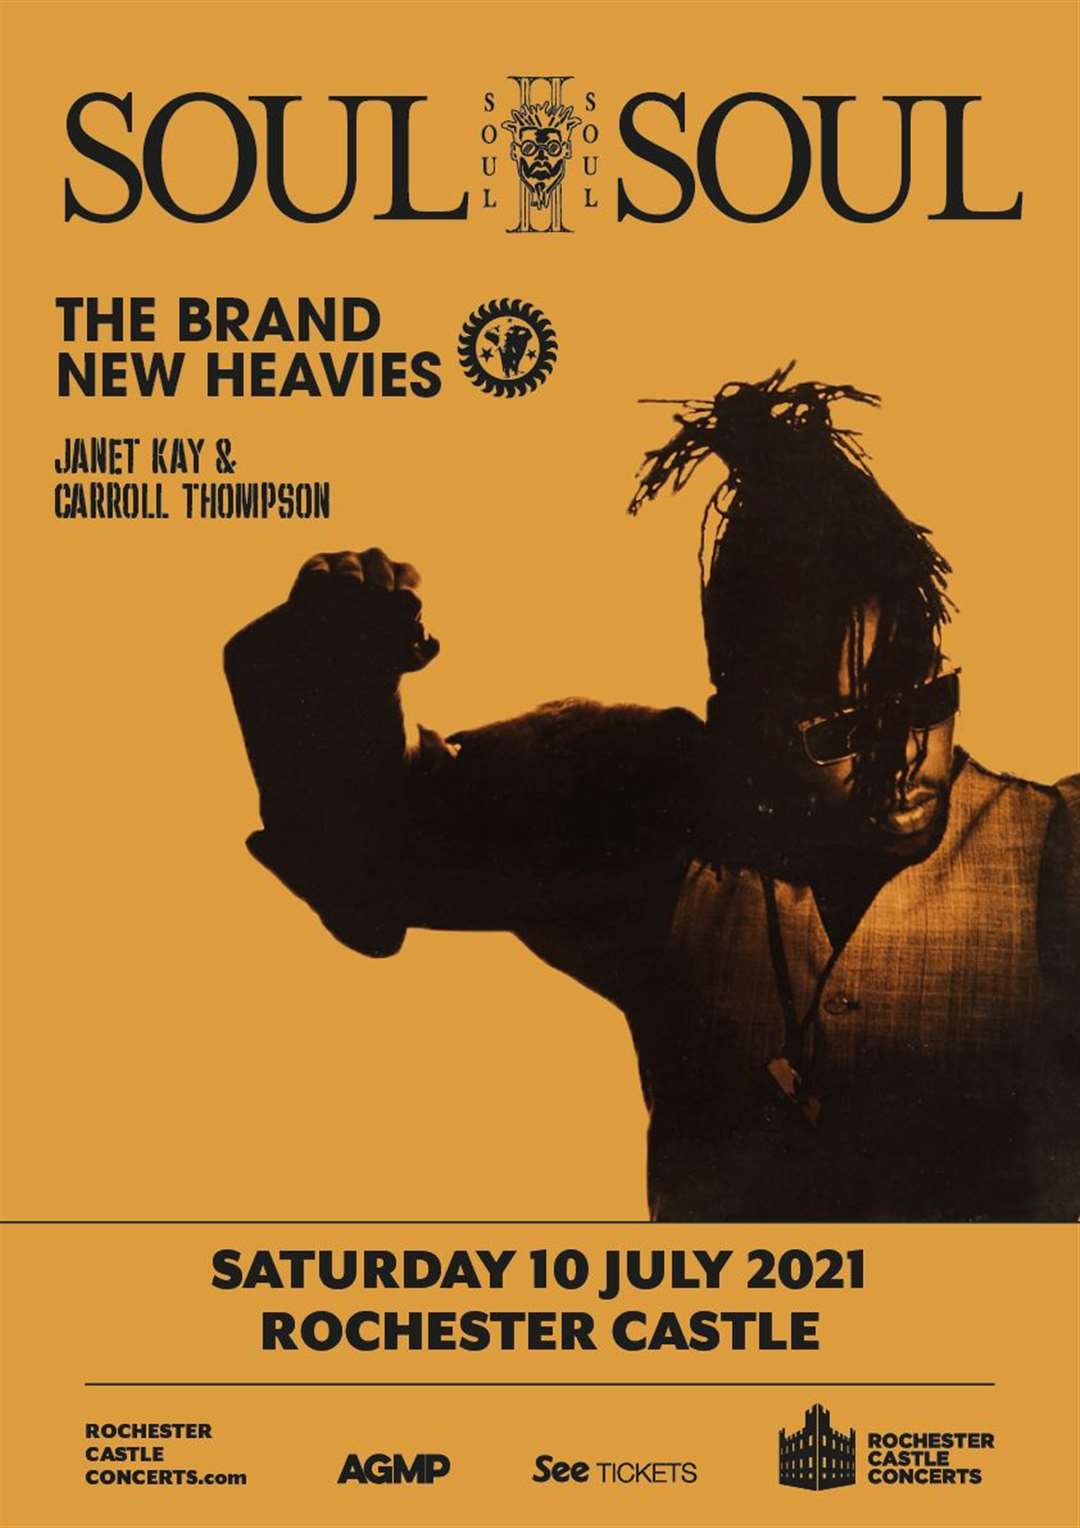 Soul II Soul will replace The Jacksons